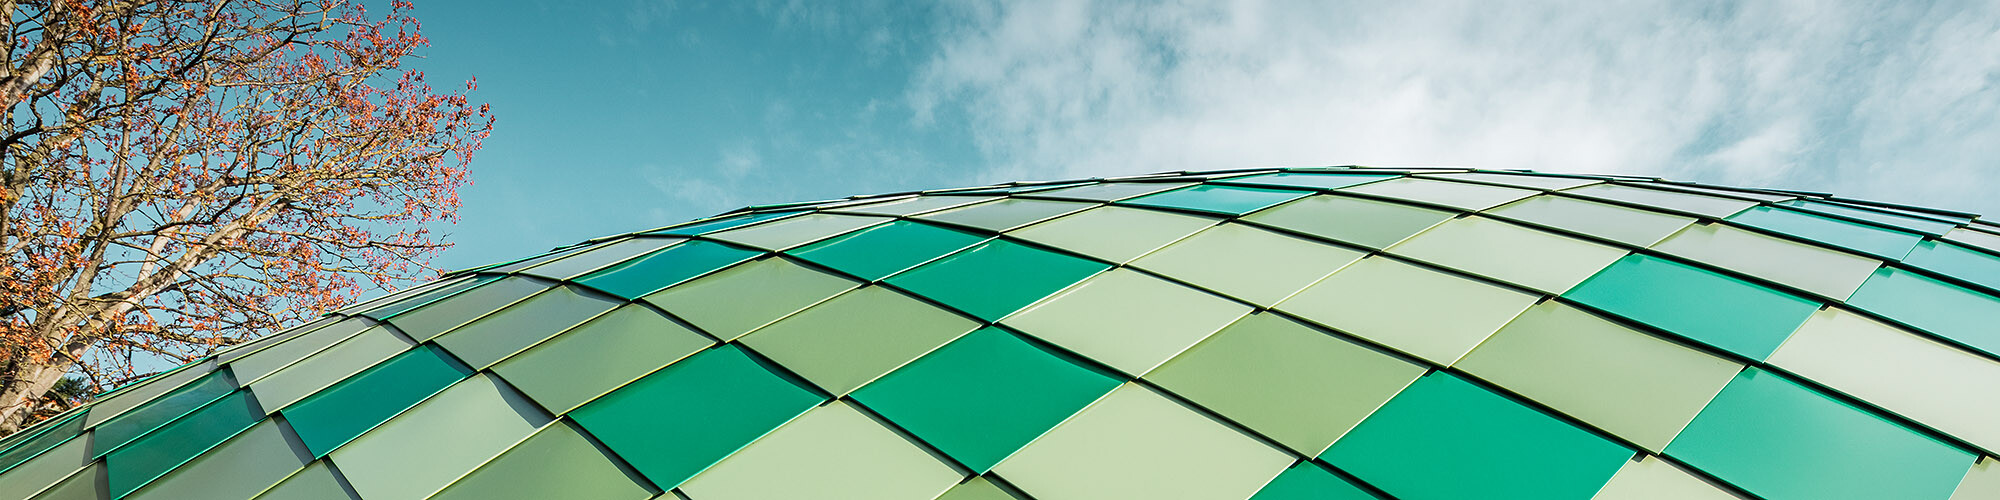 Close-up of the multiply curved aluminium façade in three different shades of green from PREFA, in the background, the sky and a tree can be seen.